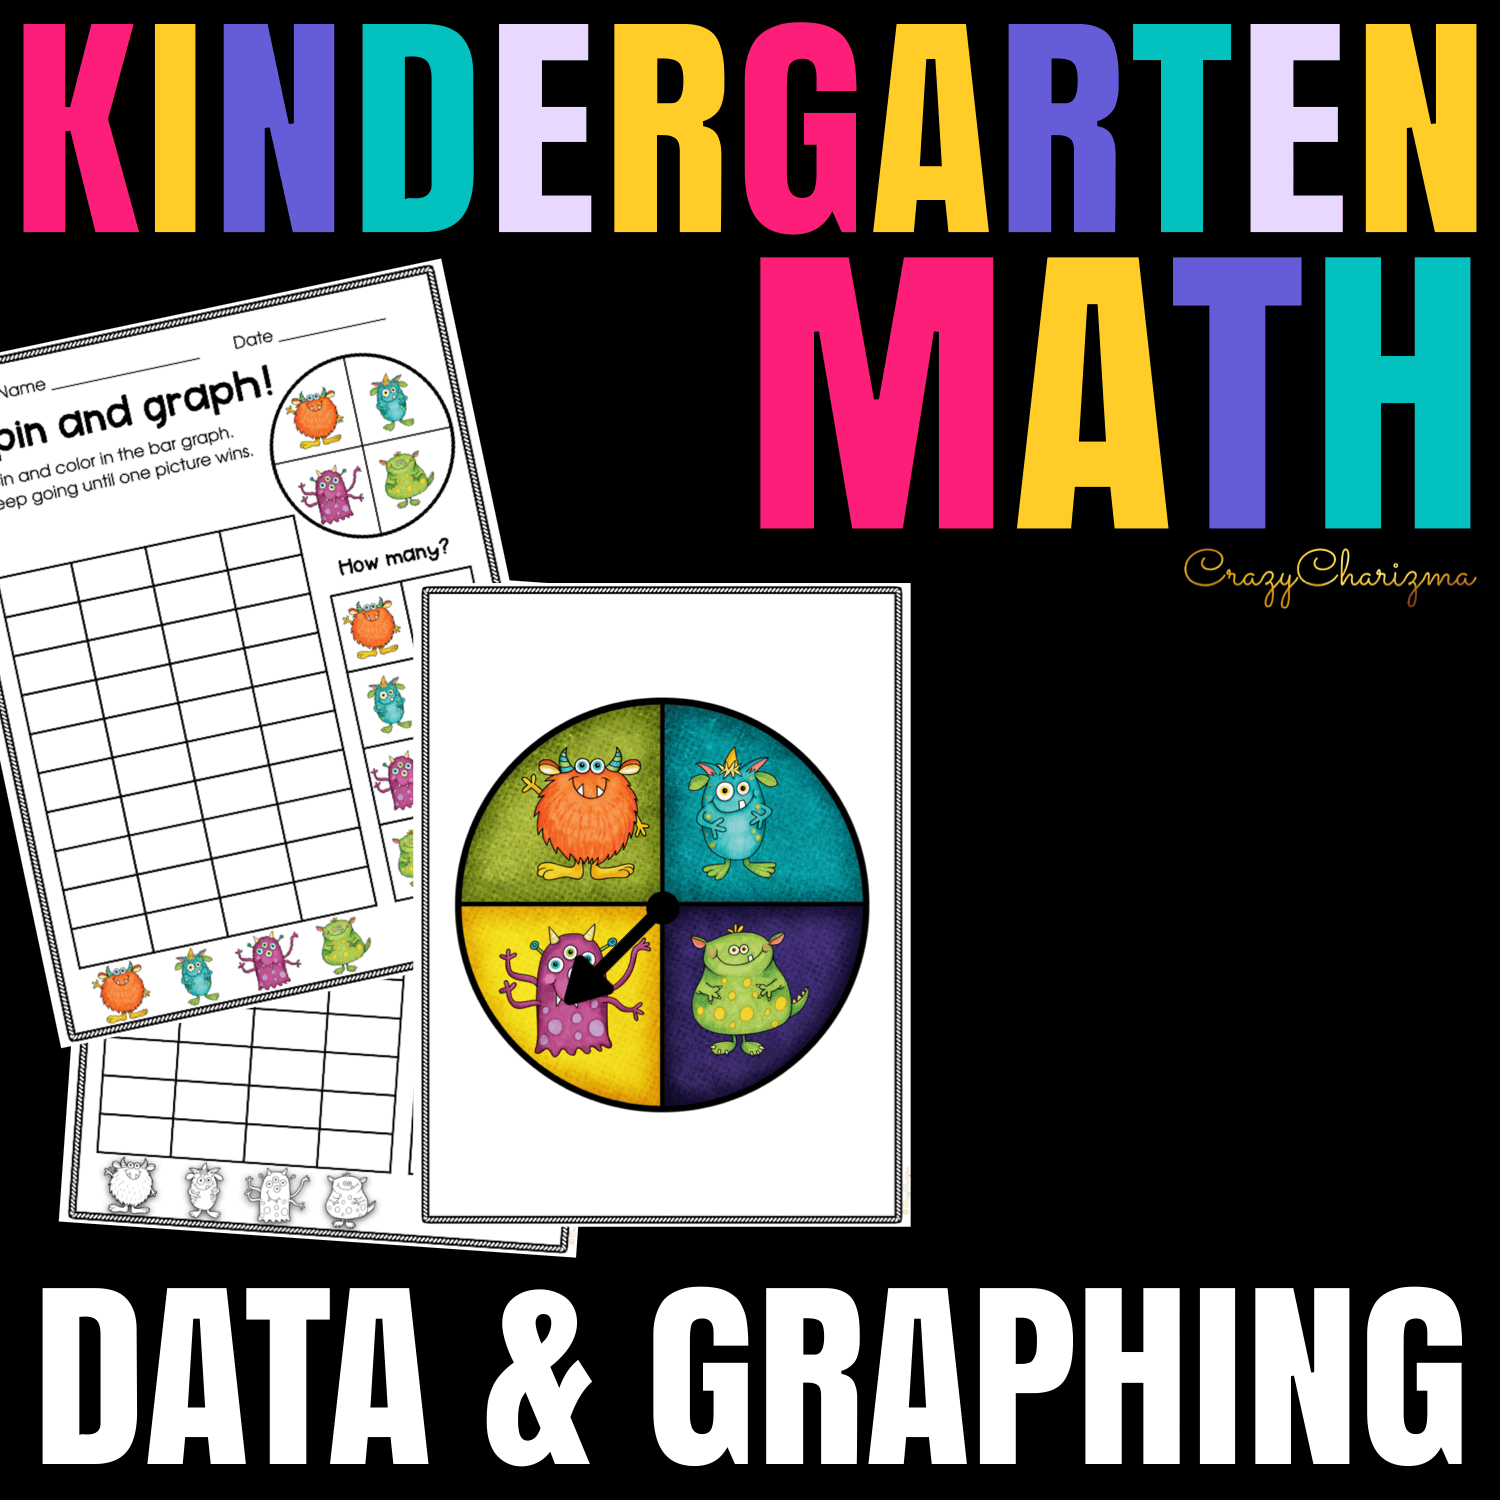 Need to practice data and graphing? Kids will spin spinners and graph data they got into bar graphs. You can use these pages as no-prep worksheets, or interactive centers for pair work or group work.